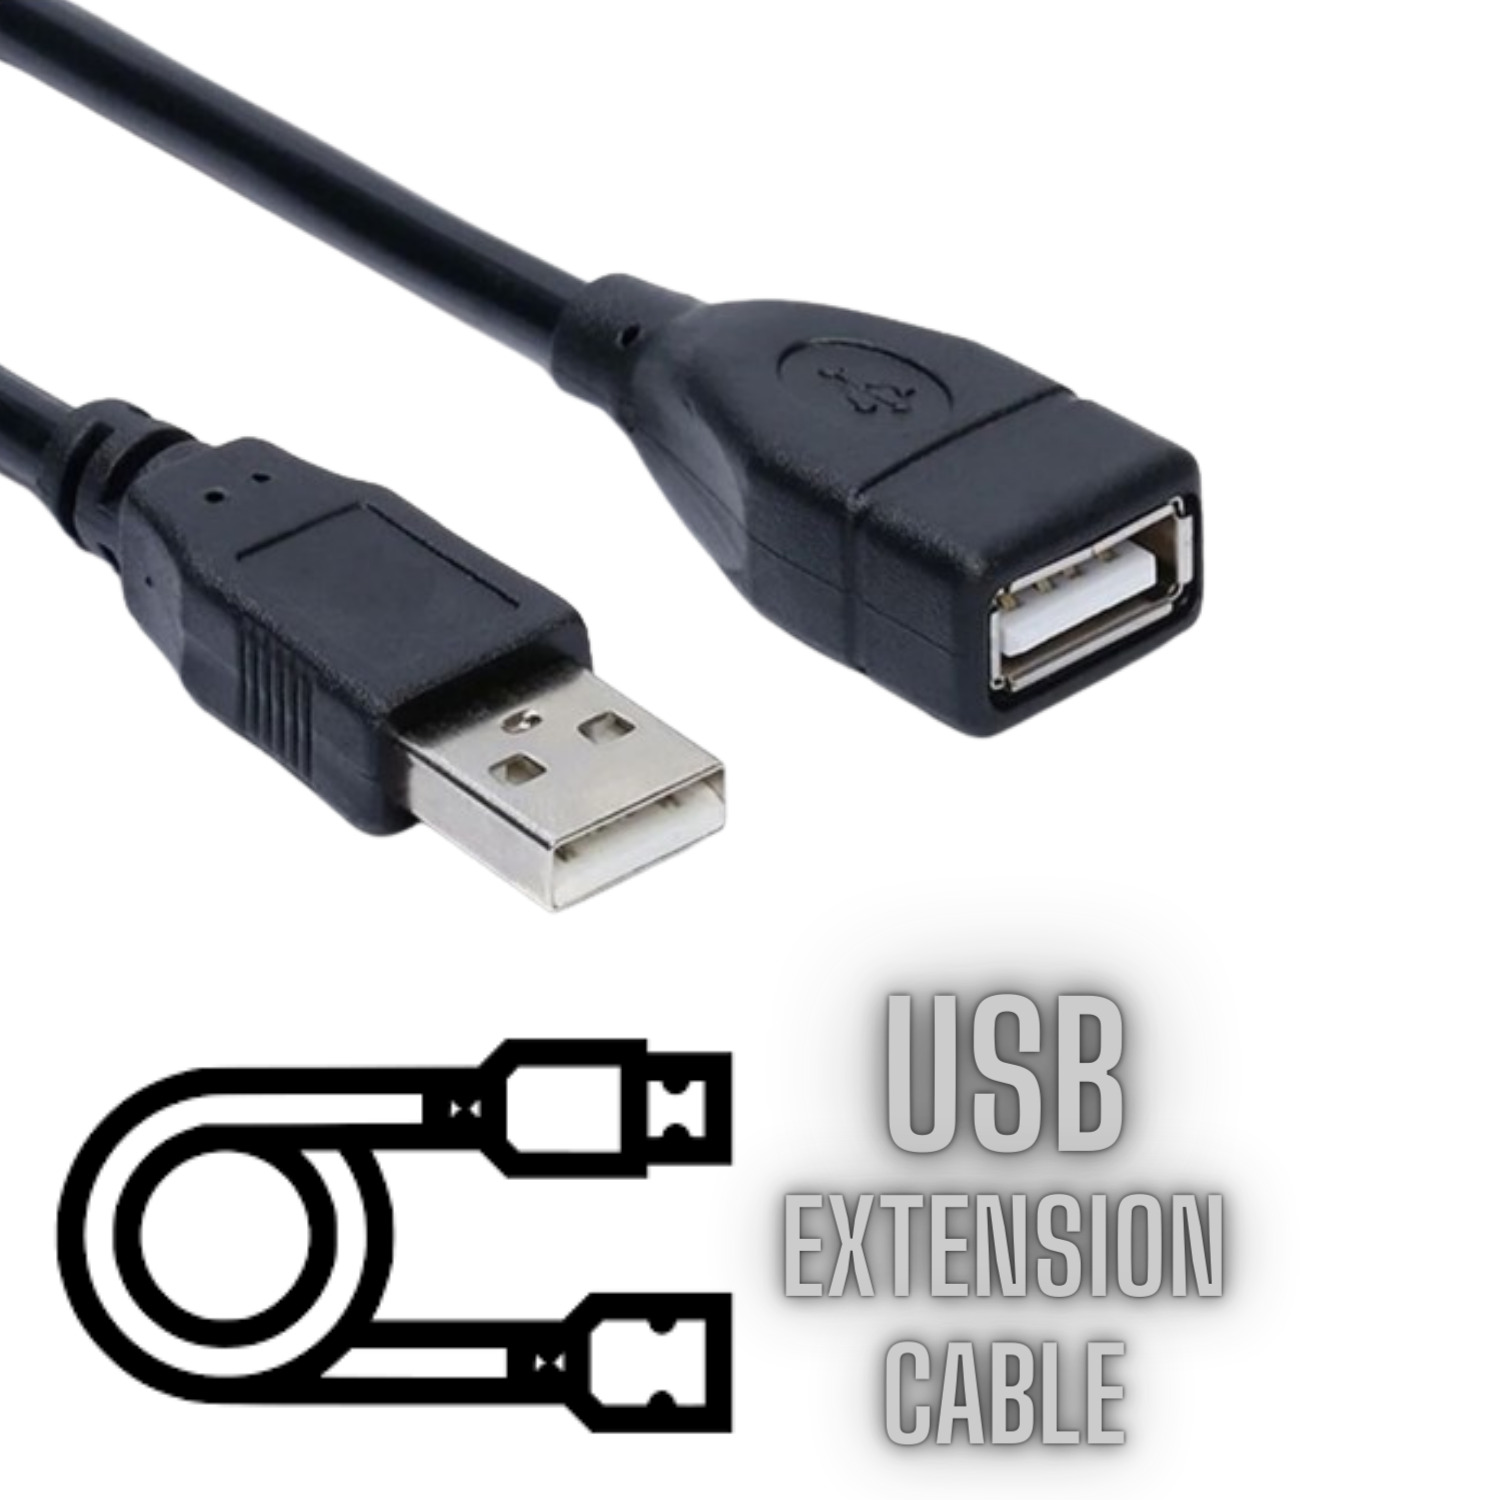 USB 2.0 Extension Cable Type A Male to A Female Extender Cord HIGH SPEED LOT